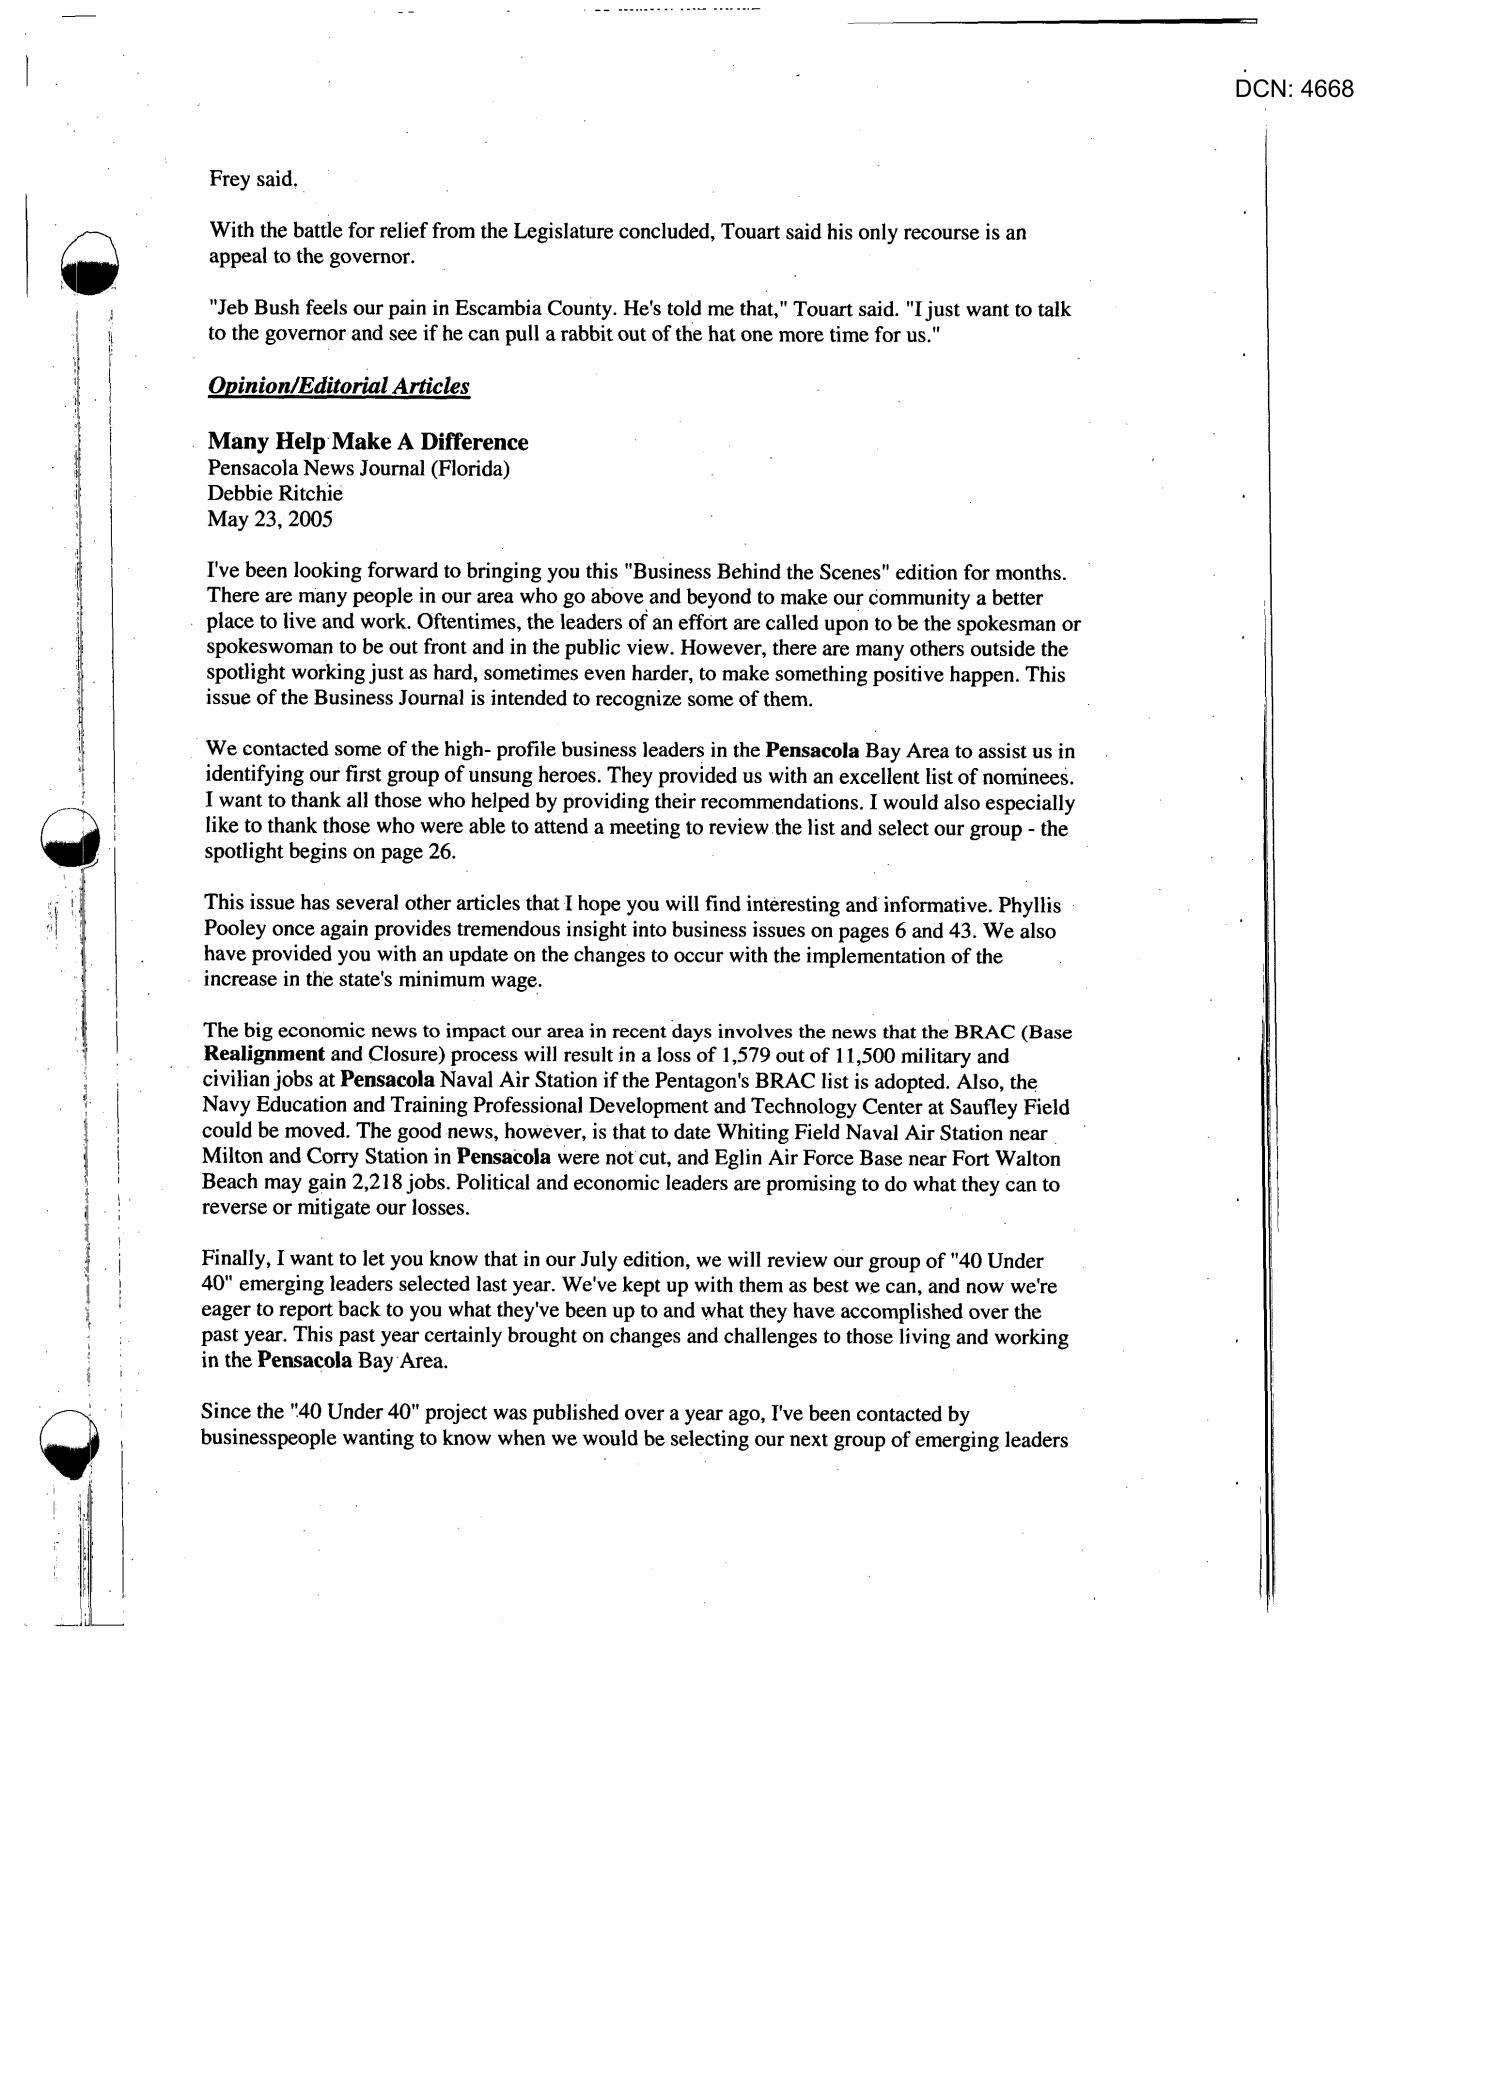 103-06A-Rh15 - Media Briefing Book Regional Hearing - 7-22-05 - New Orleans - LA
                                                
                                                    [Sequence #]: 25 of 107
                                                